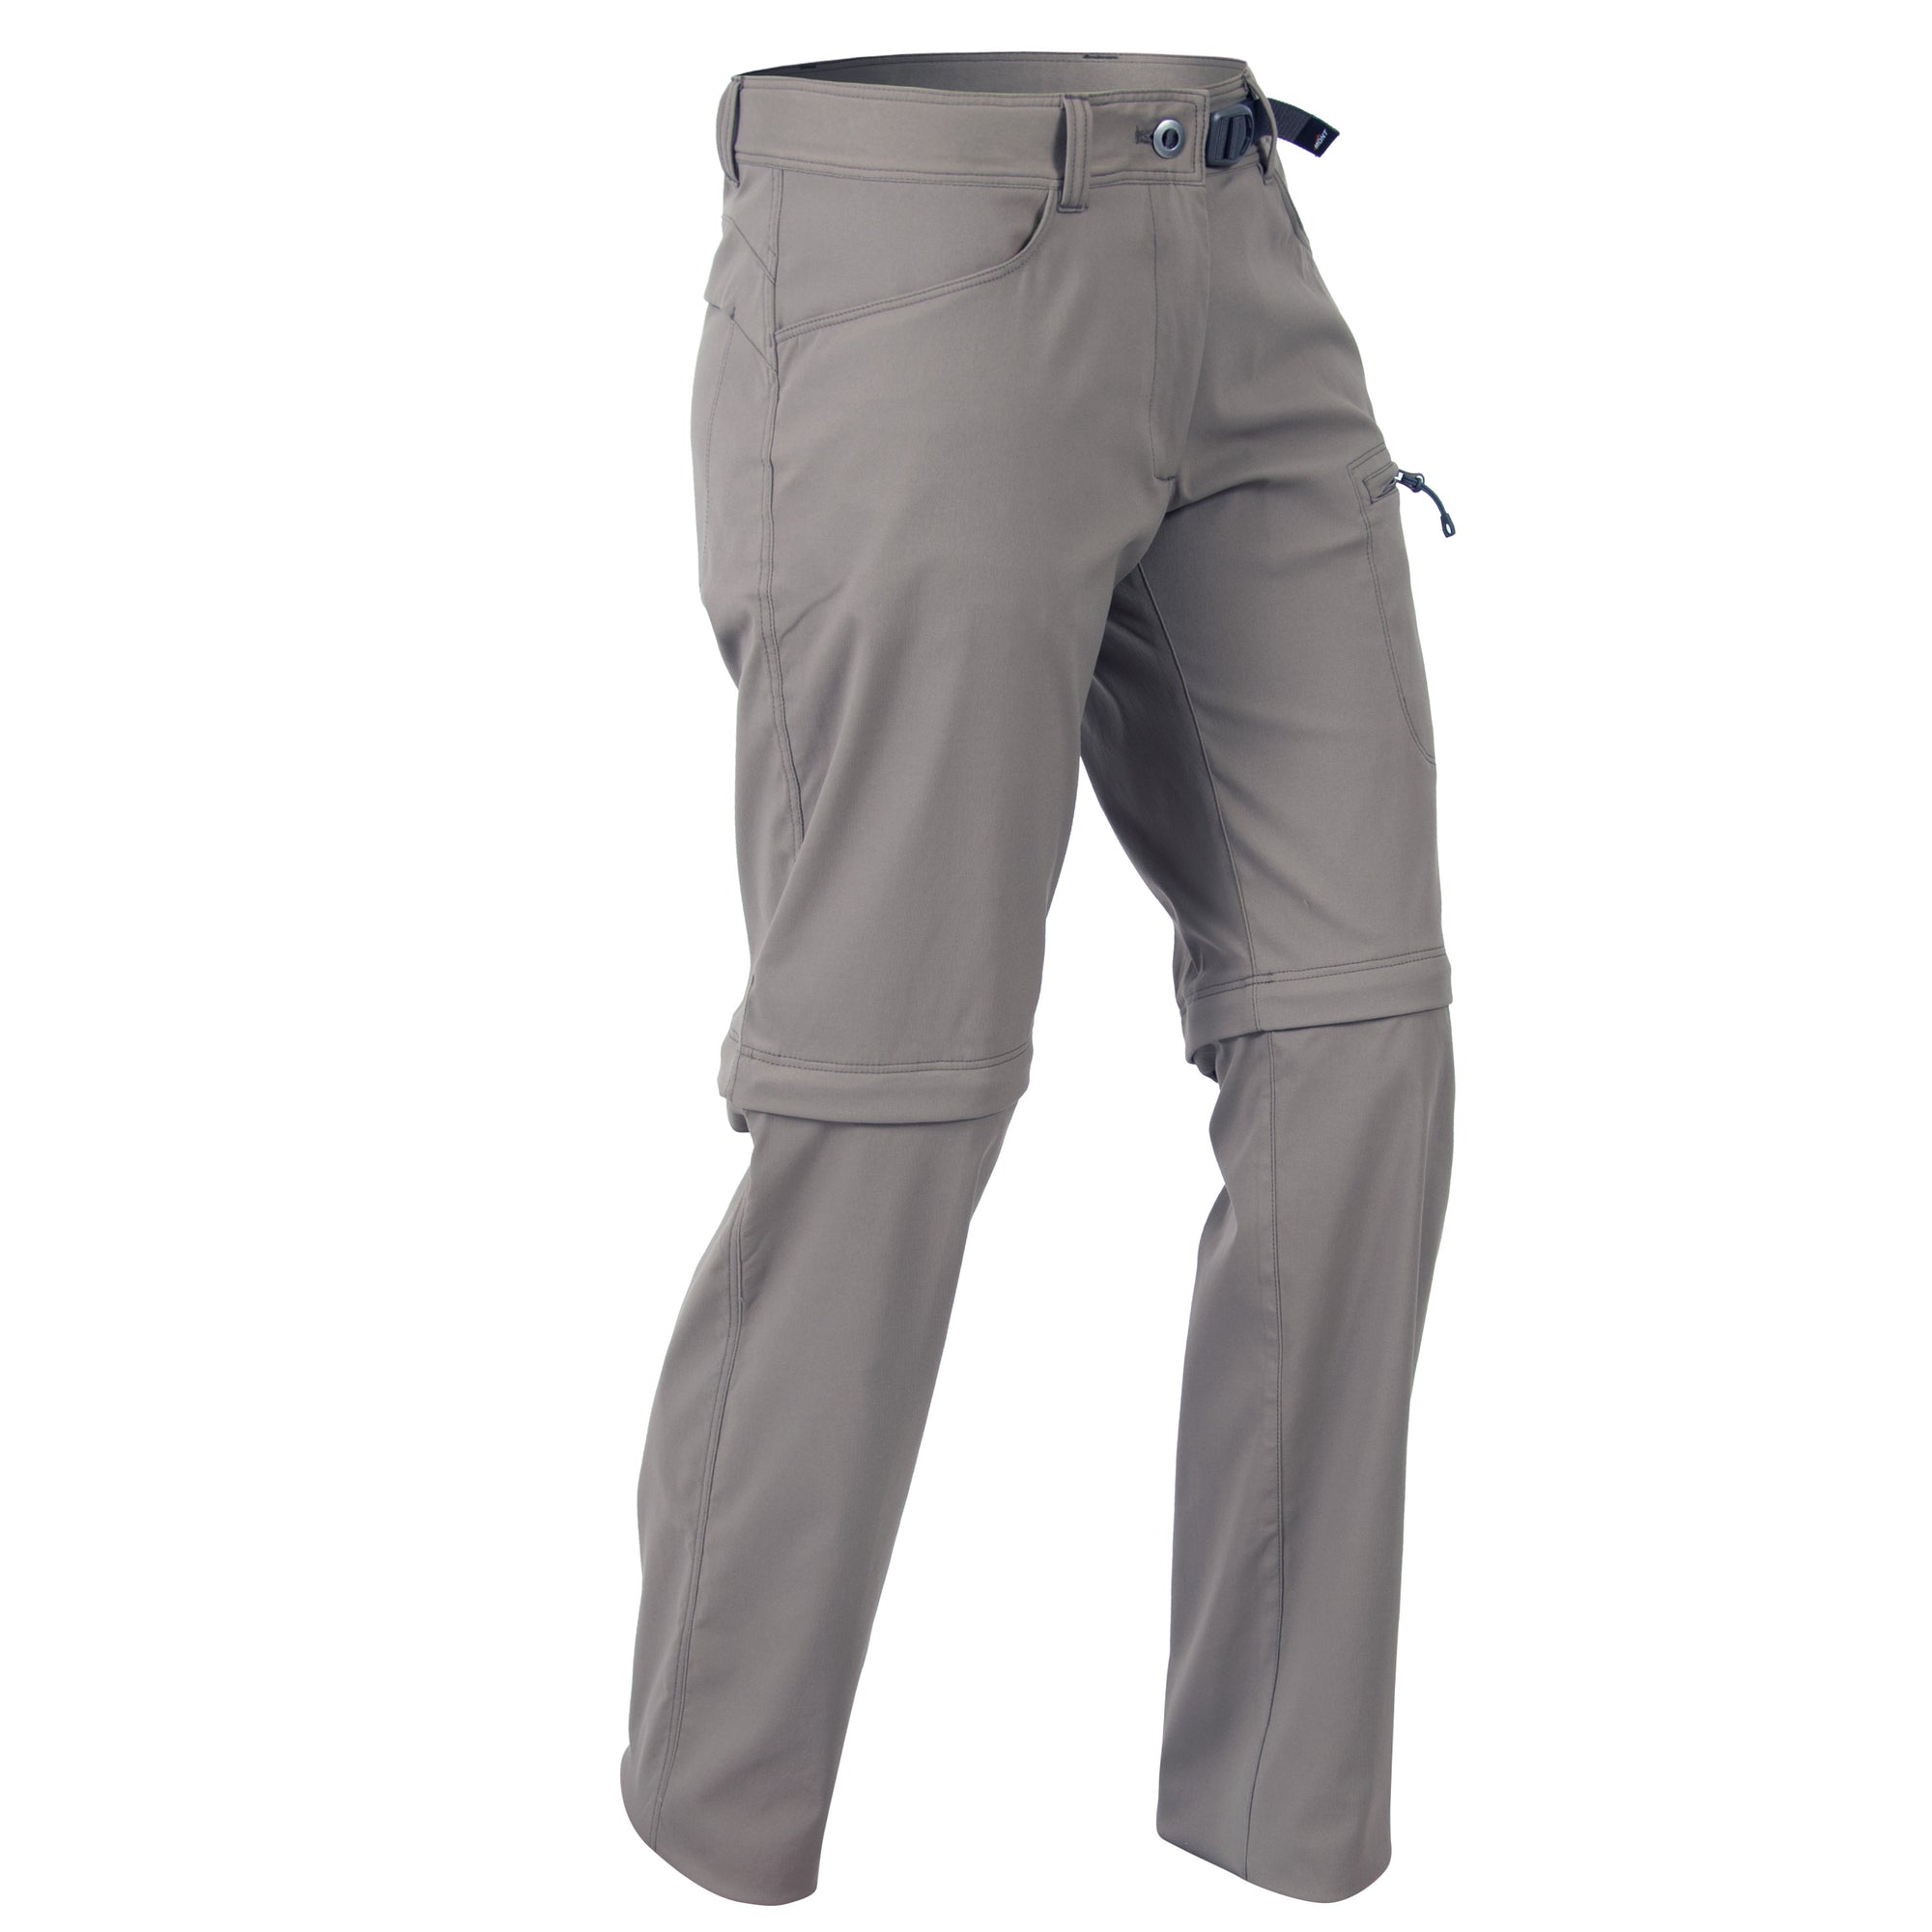 Outdoor Research Ferrosi Convertible Pants Review 